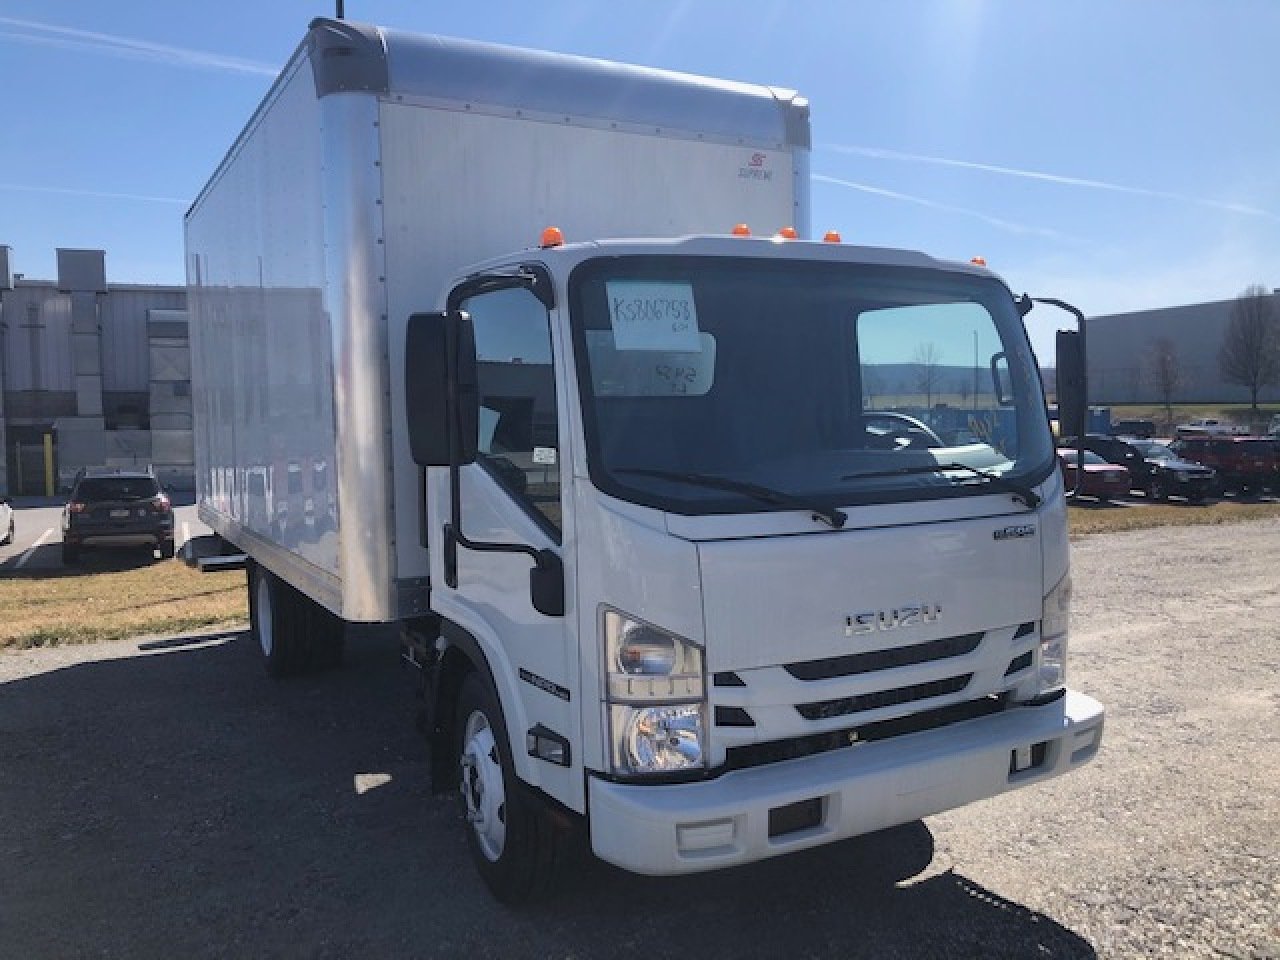 New Truck Inventory - 1001430 01 2 - 57